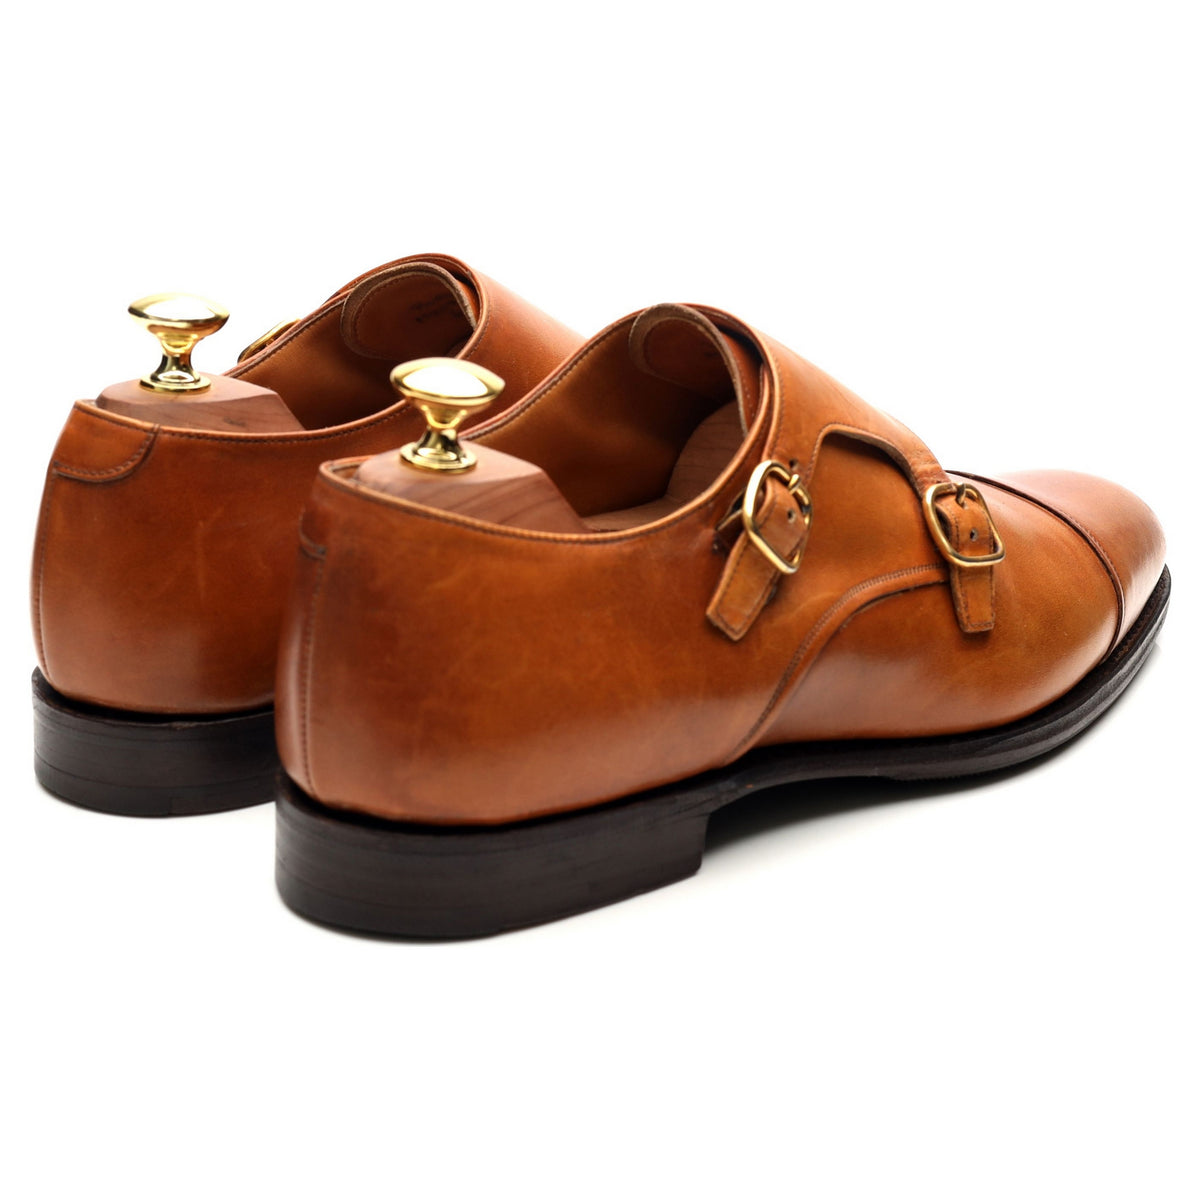 Tan Brown Leather Double Monk Strap UK 8 F